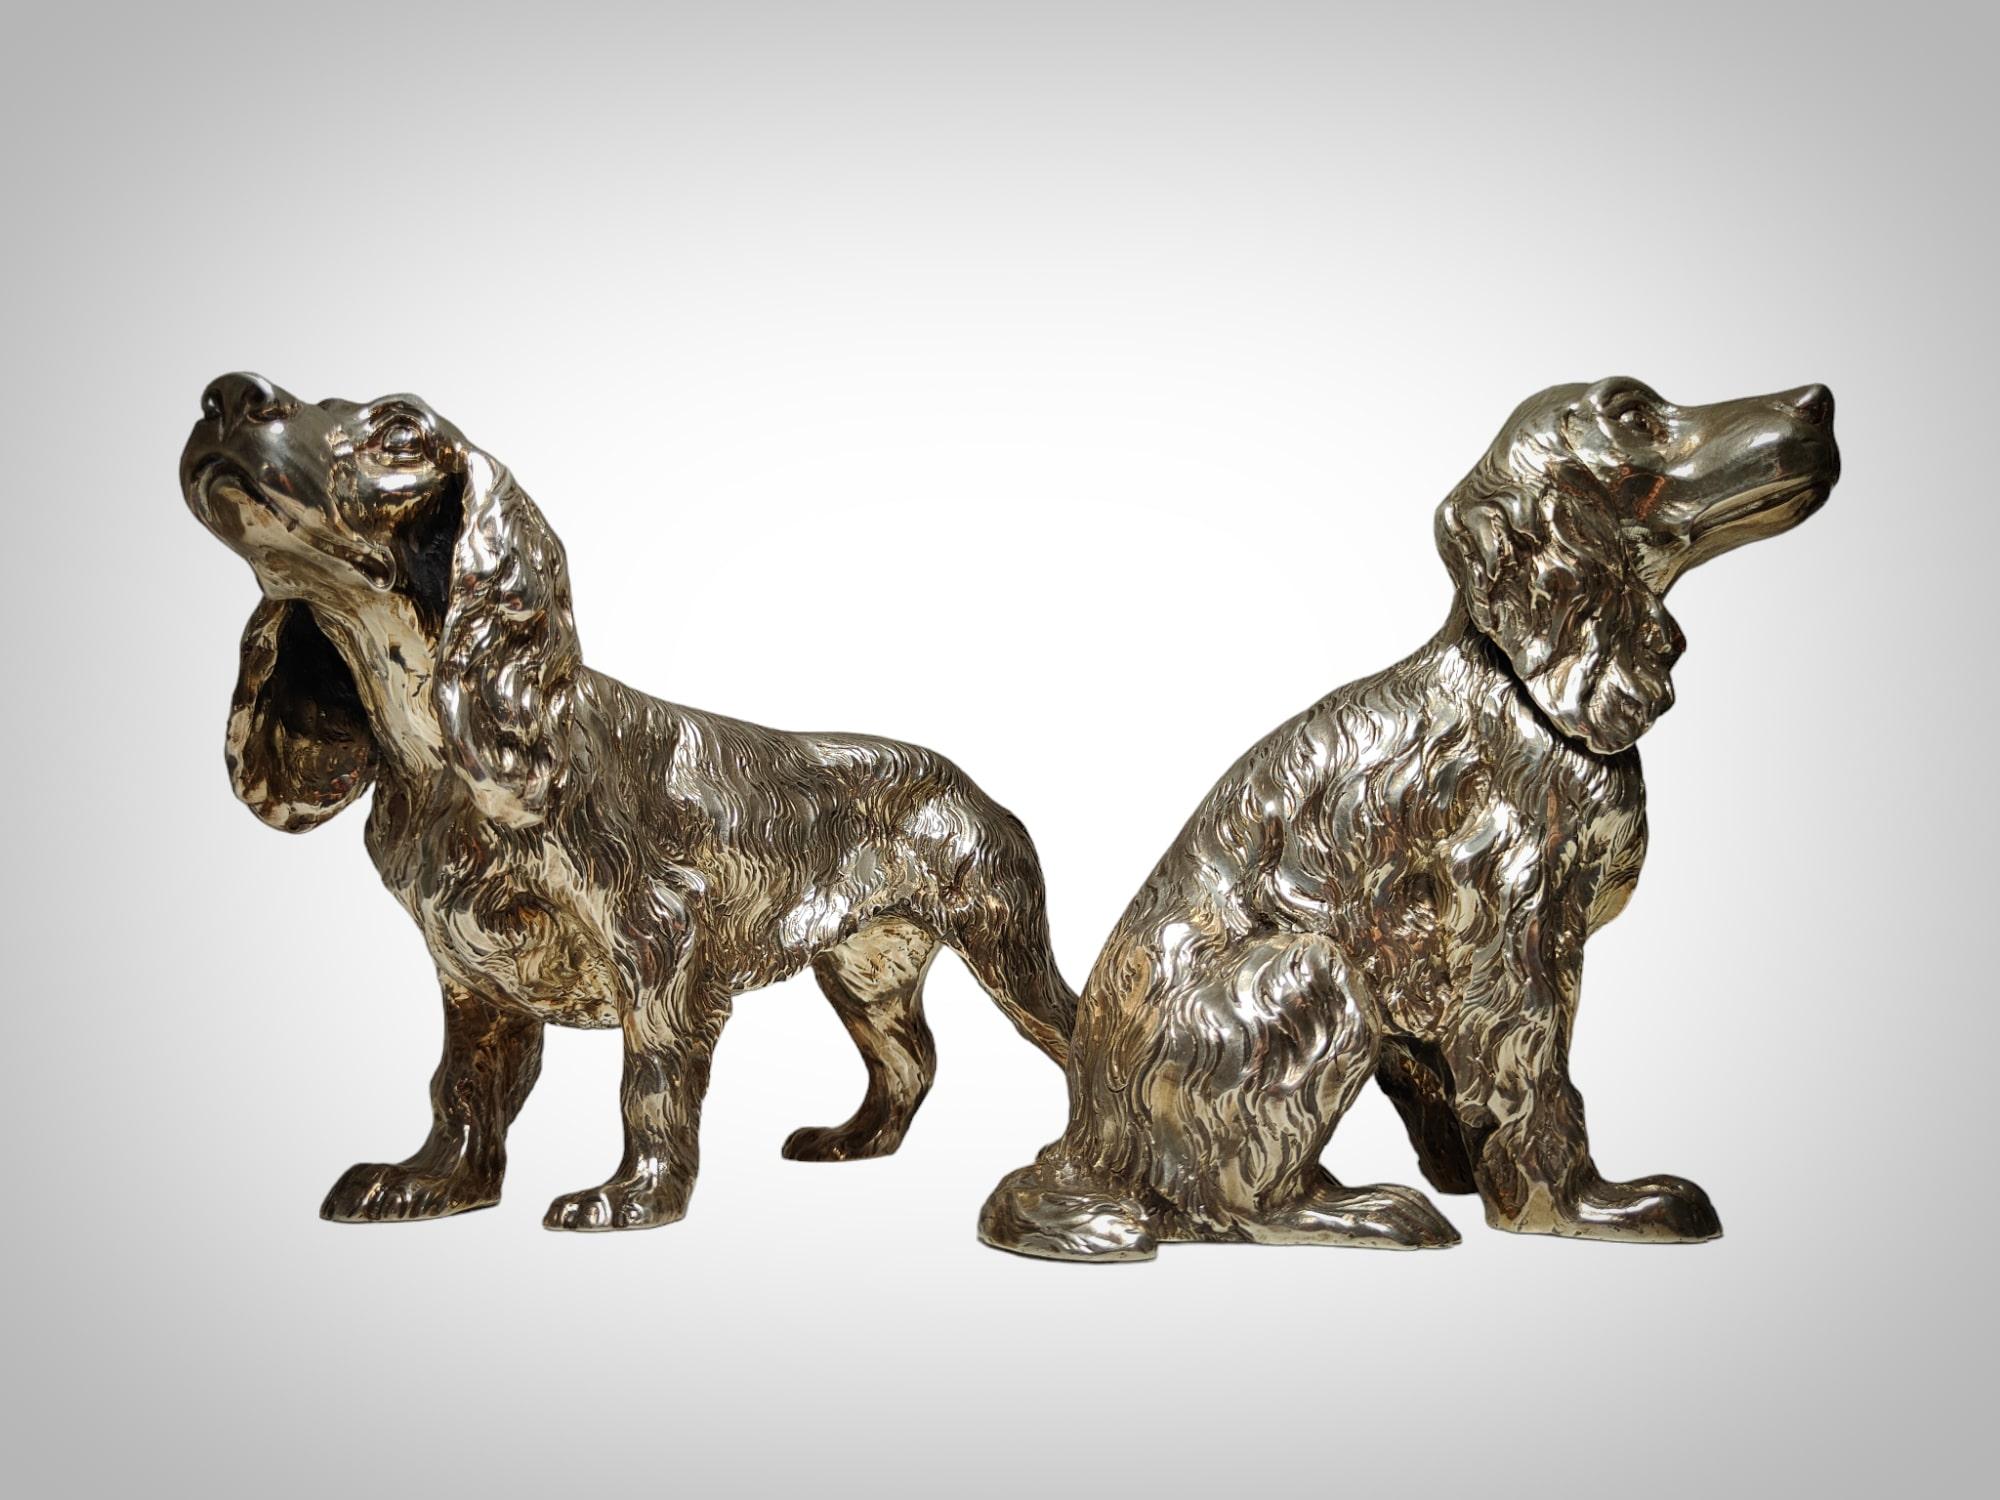 Exquisite Pair of Italian Solid Silver Cocker Spaniel Dogs For Sale 7